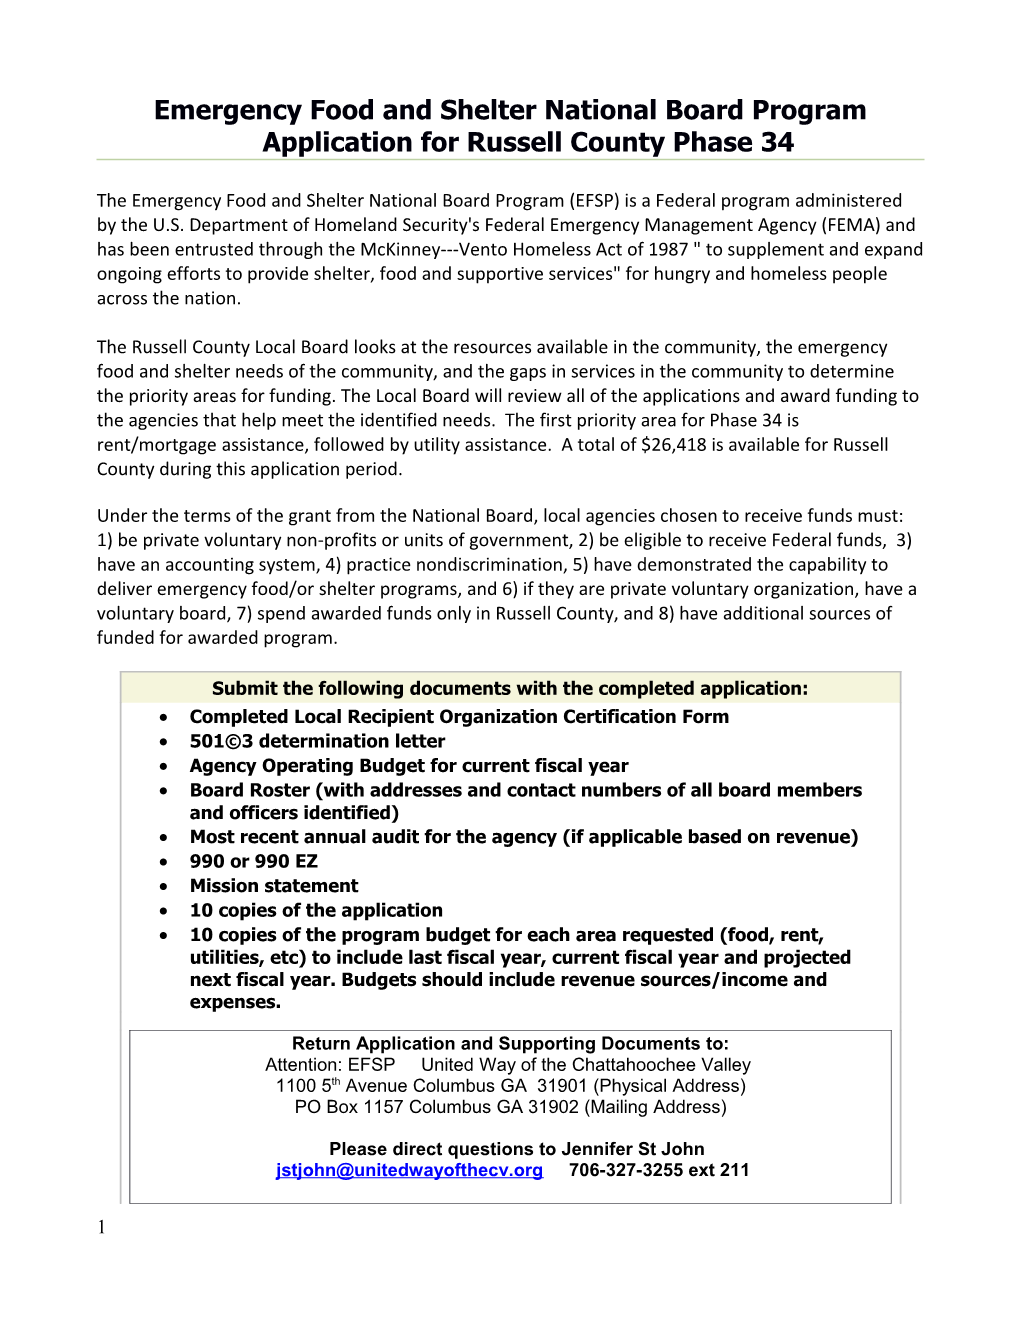 Emergency Food and Shelter National Board Program Application for Russell Countyphase 34